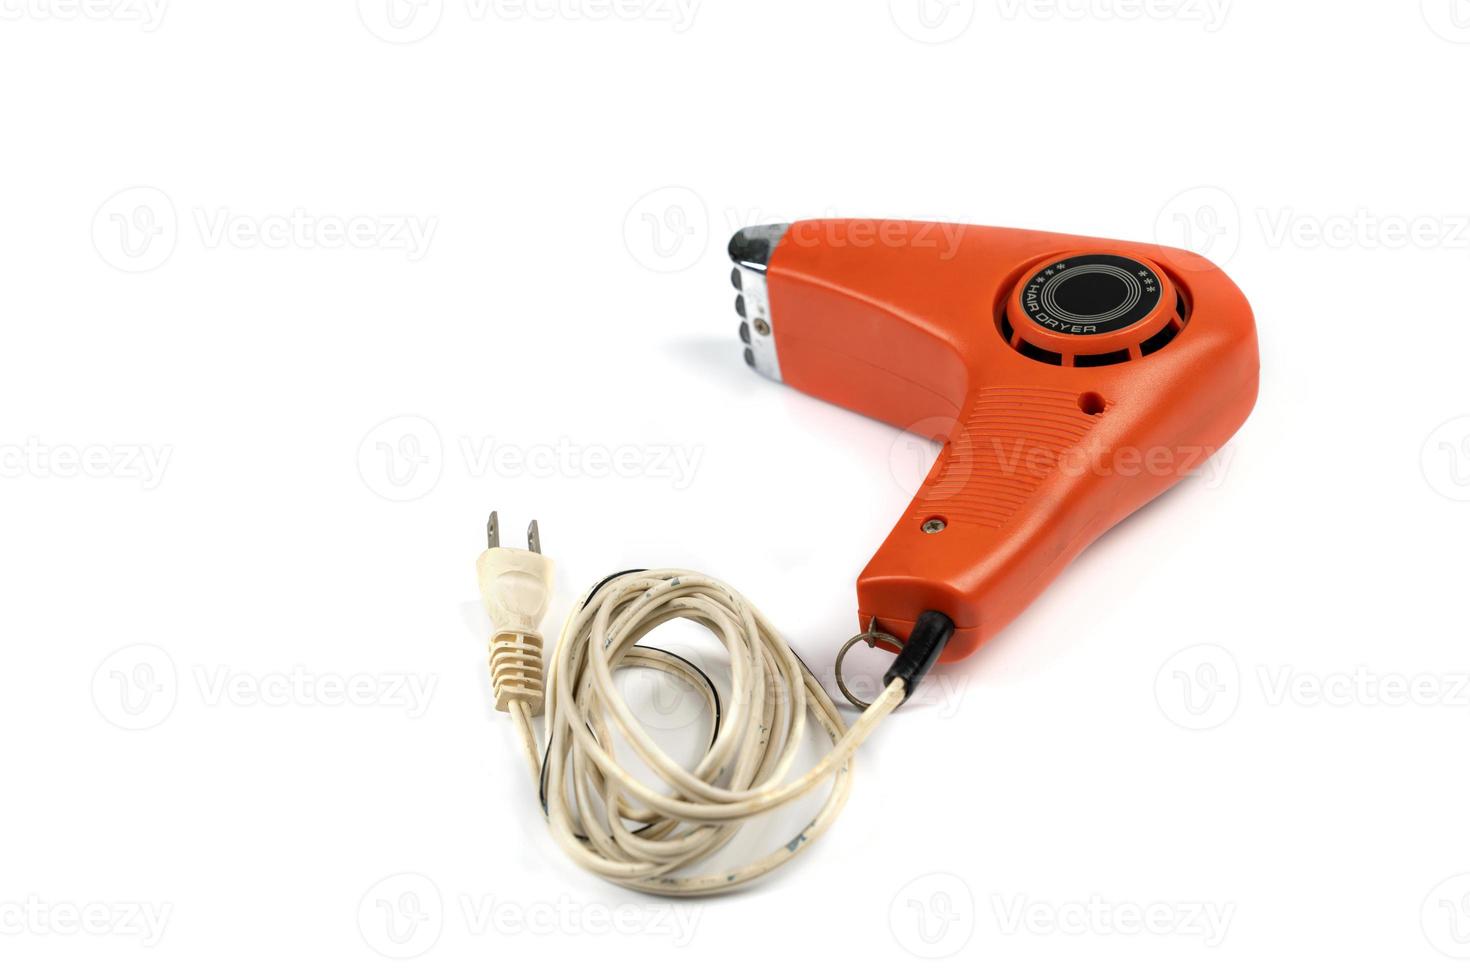 Vintage orange hair dryer on white background with rolled cable buttom. photo